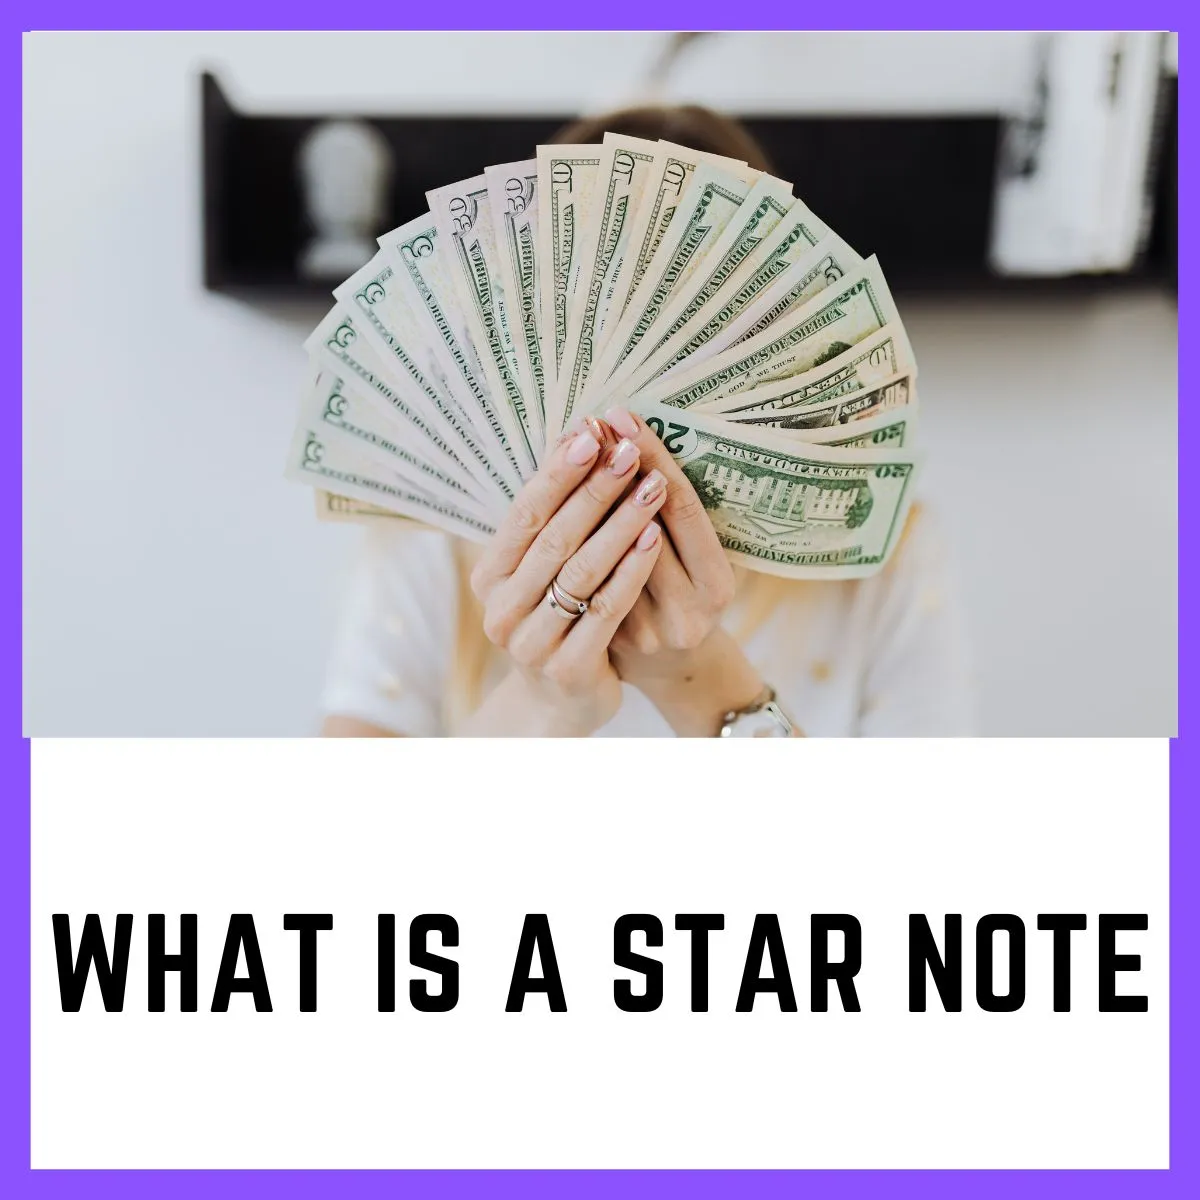 What is a star note